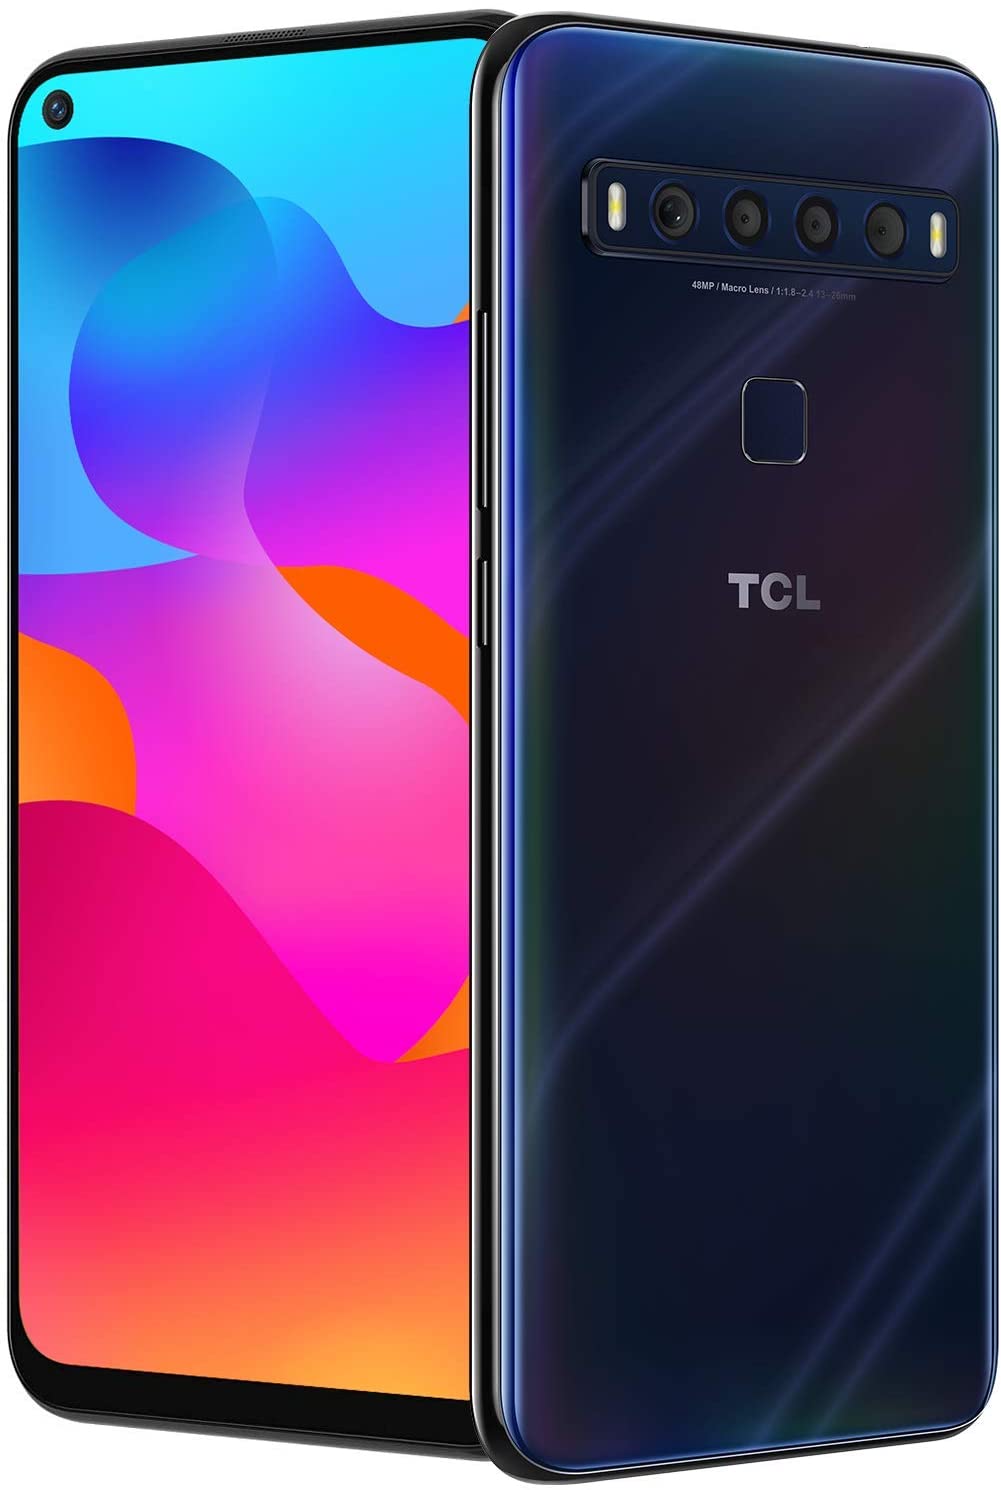 64GB TCL 10L Unlocked Android Smartphone $175 + Free Shipping